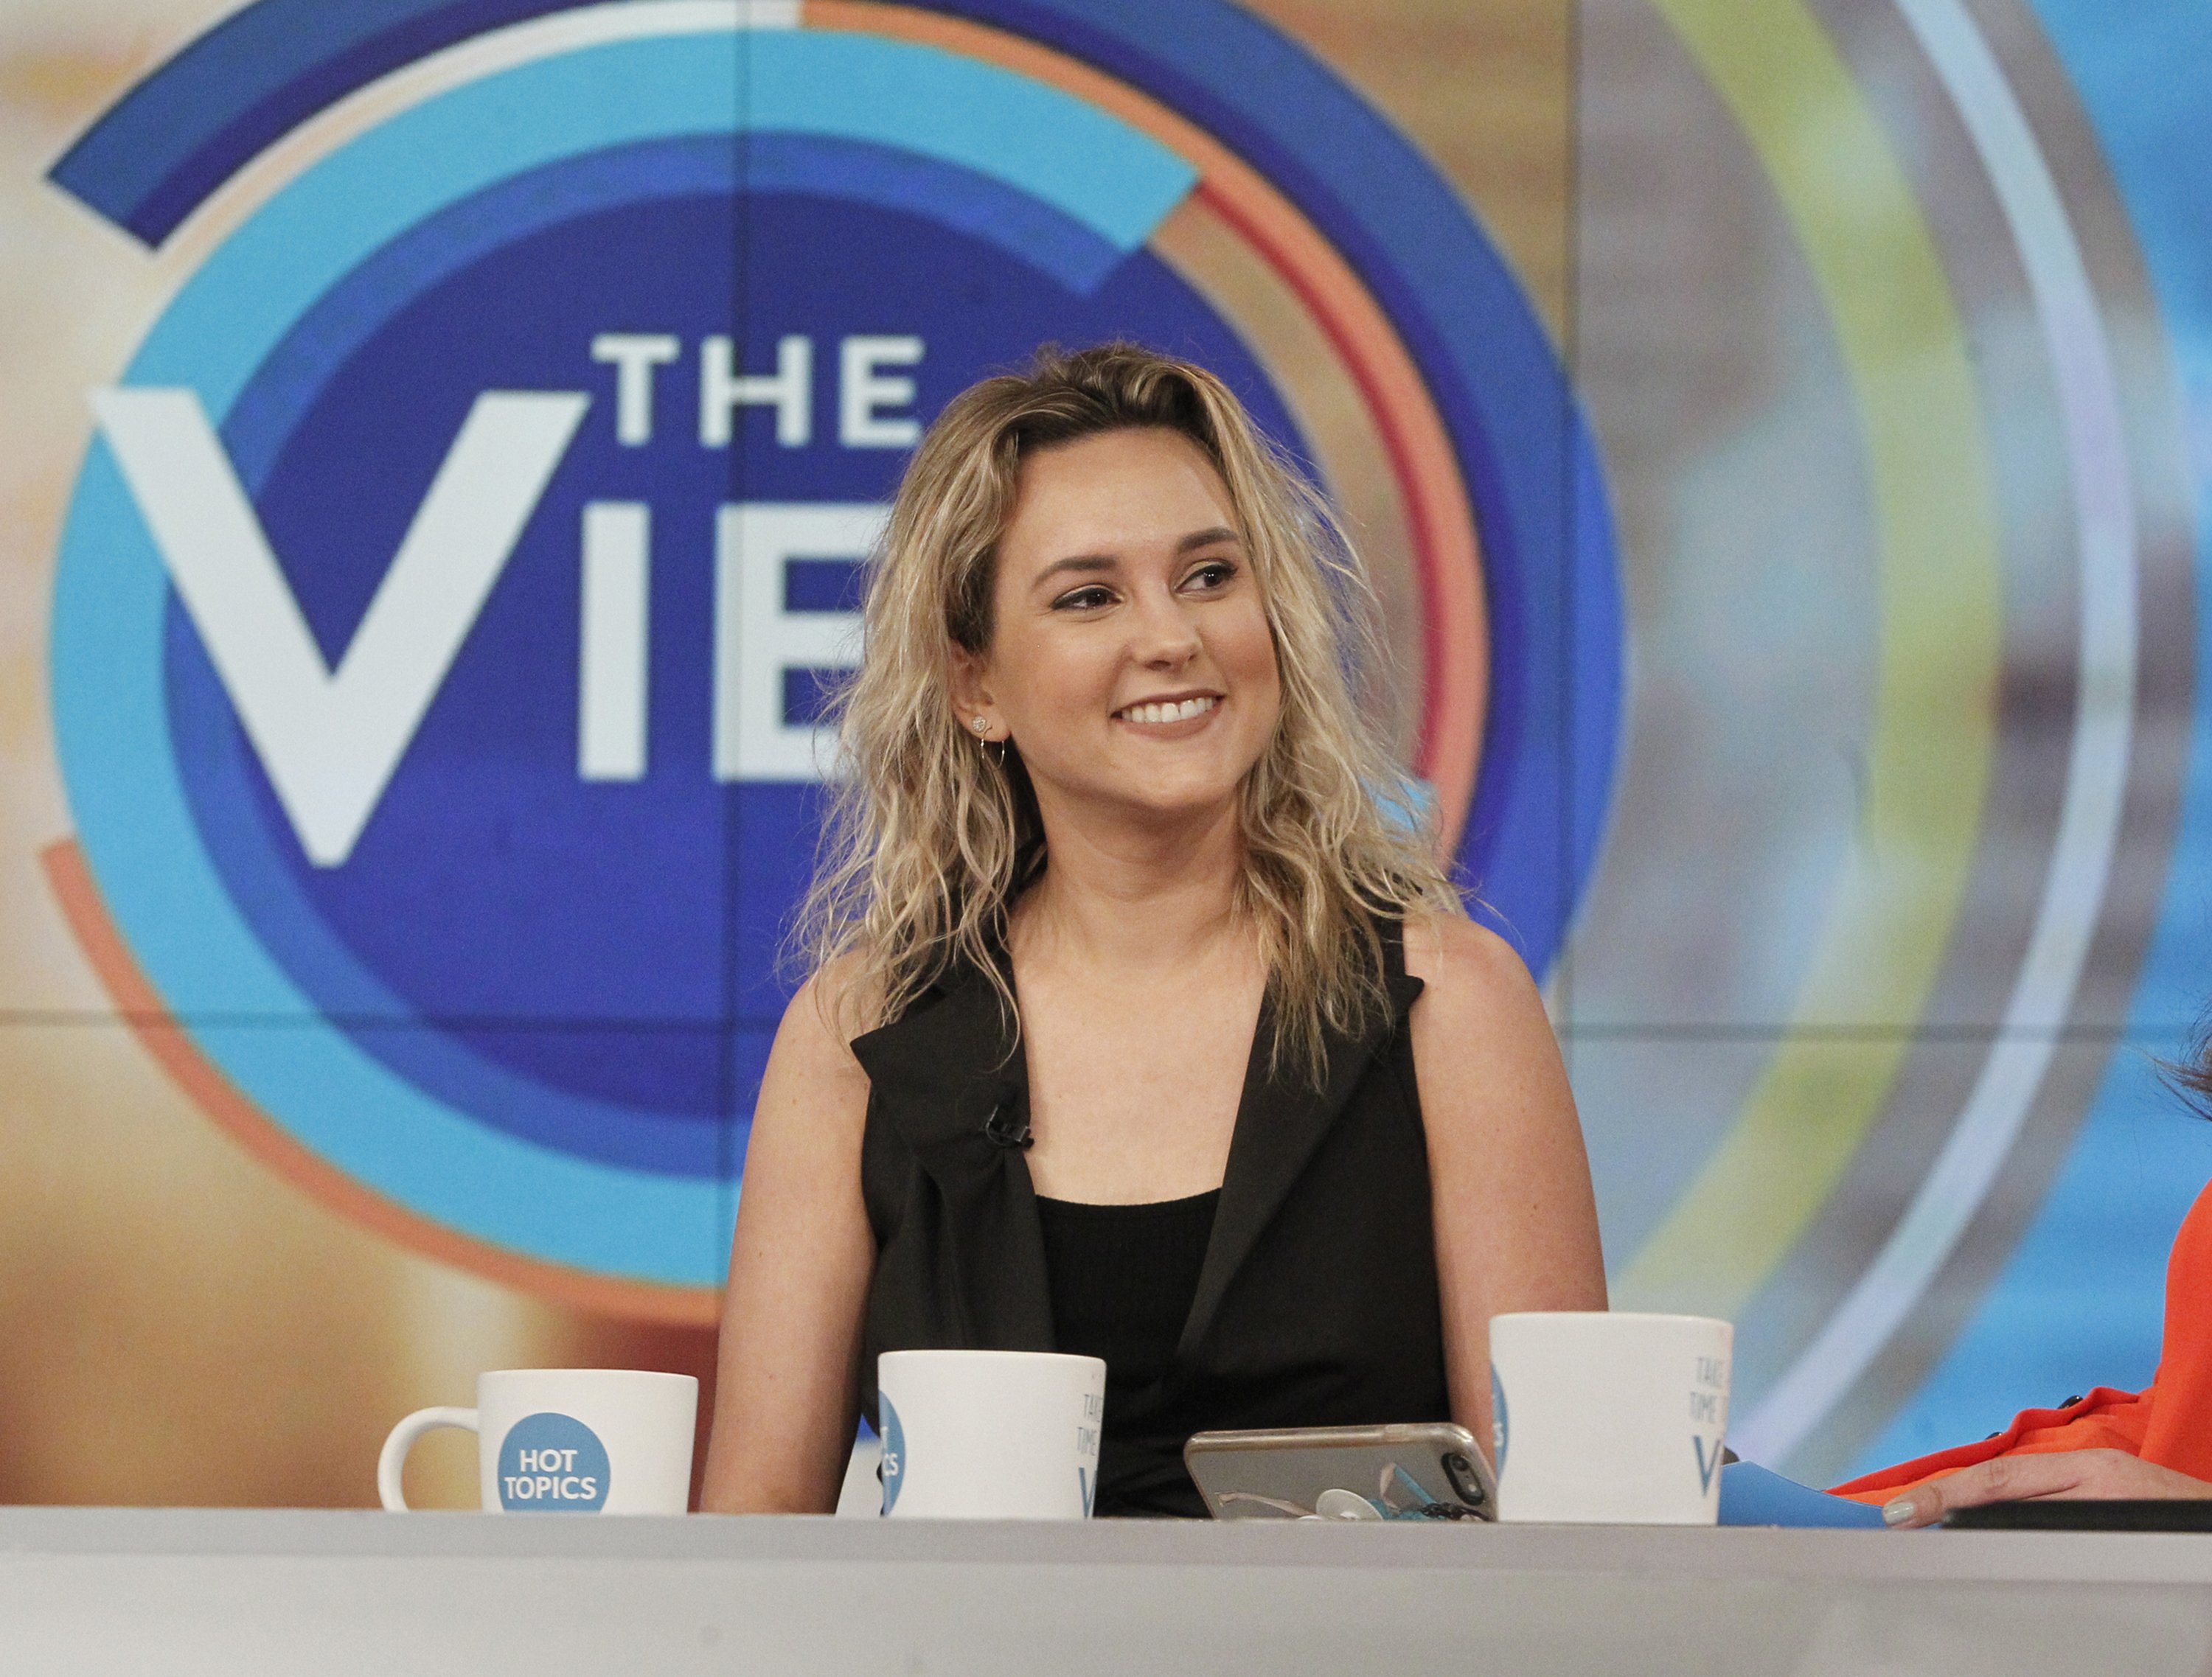 Charlotte Pence on "The View" on March 20, 2018  | Photo: GettyImages